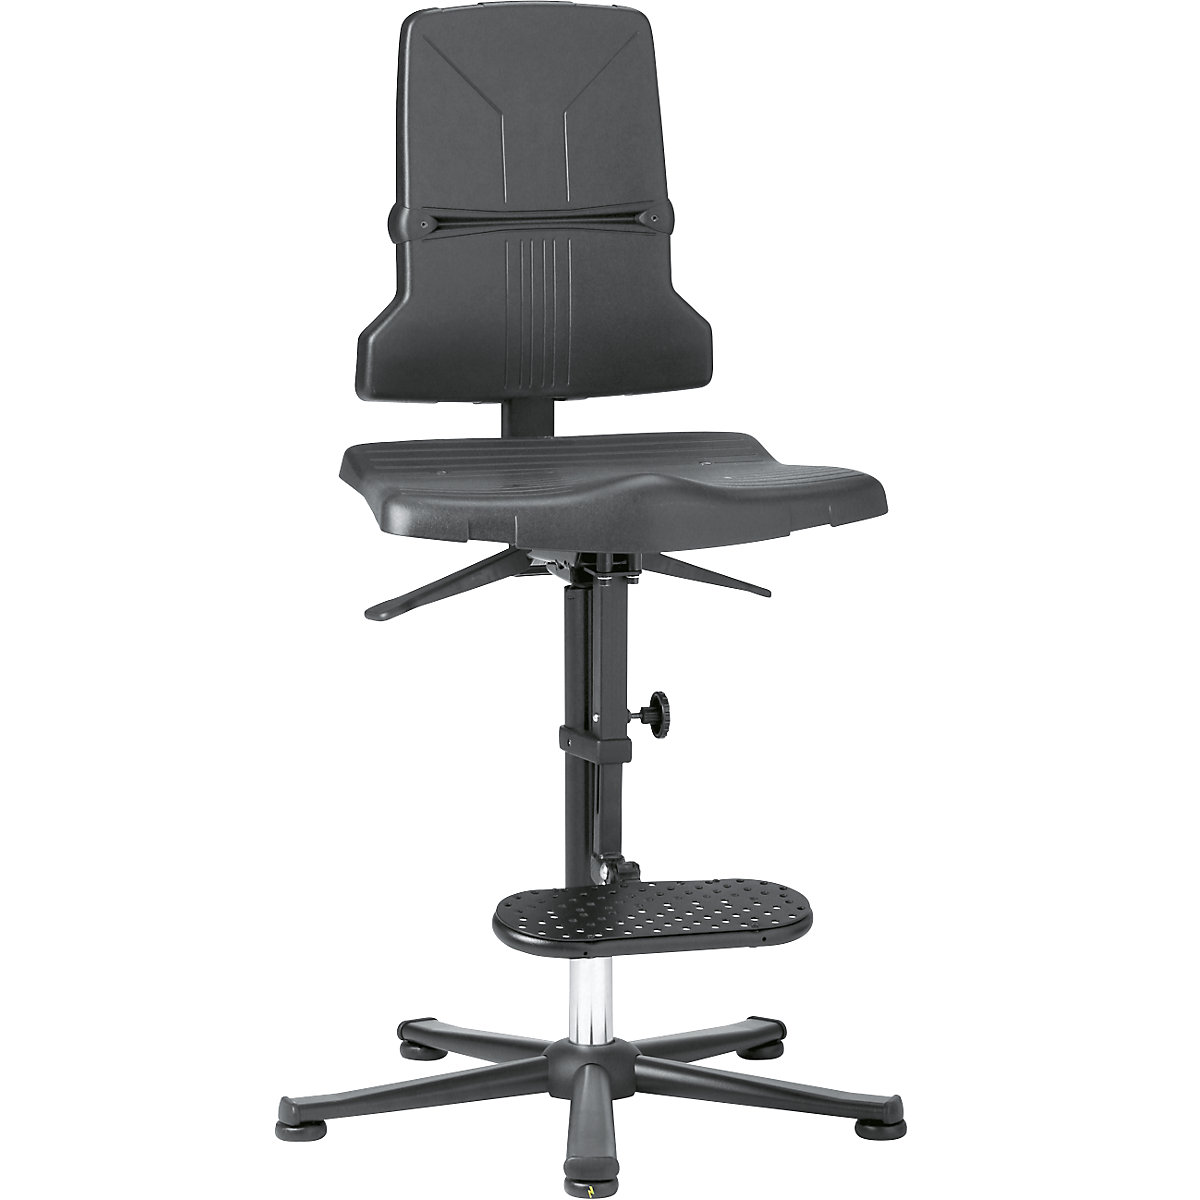 ESD SINTEC industrial swivel chair – bimos, with adjustable seat inclination, with floor glides and step-up-1